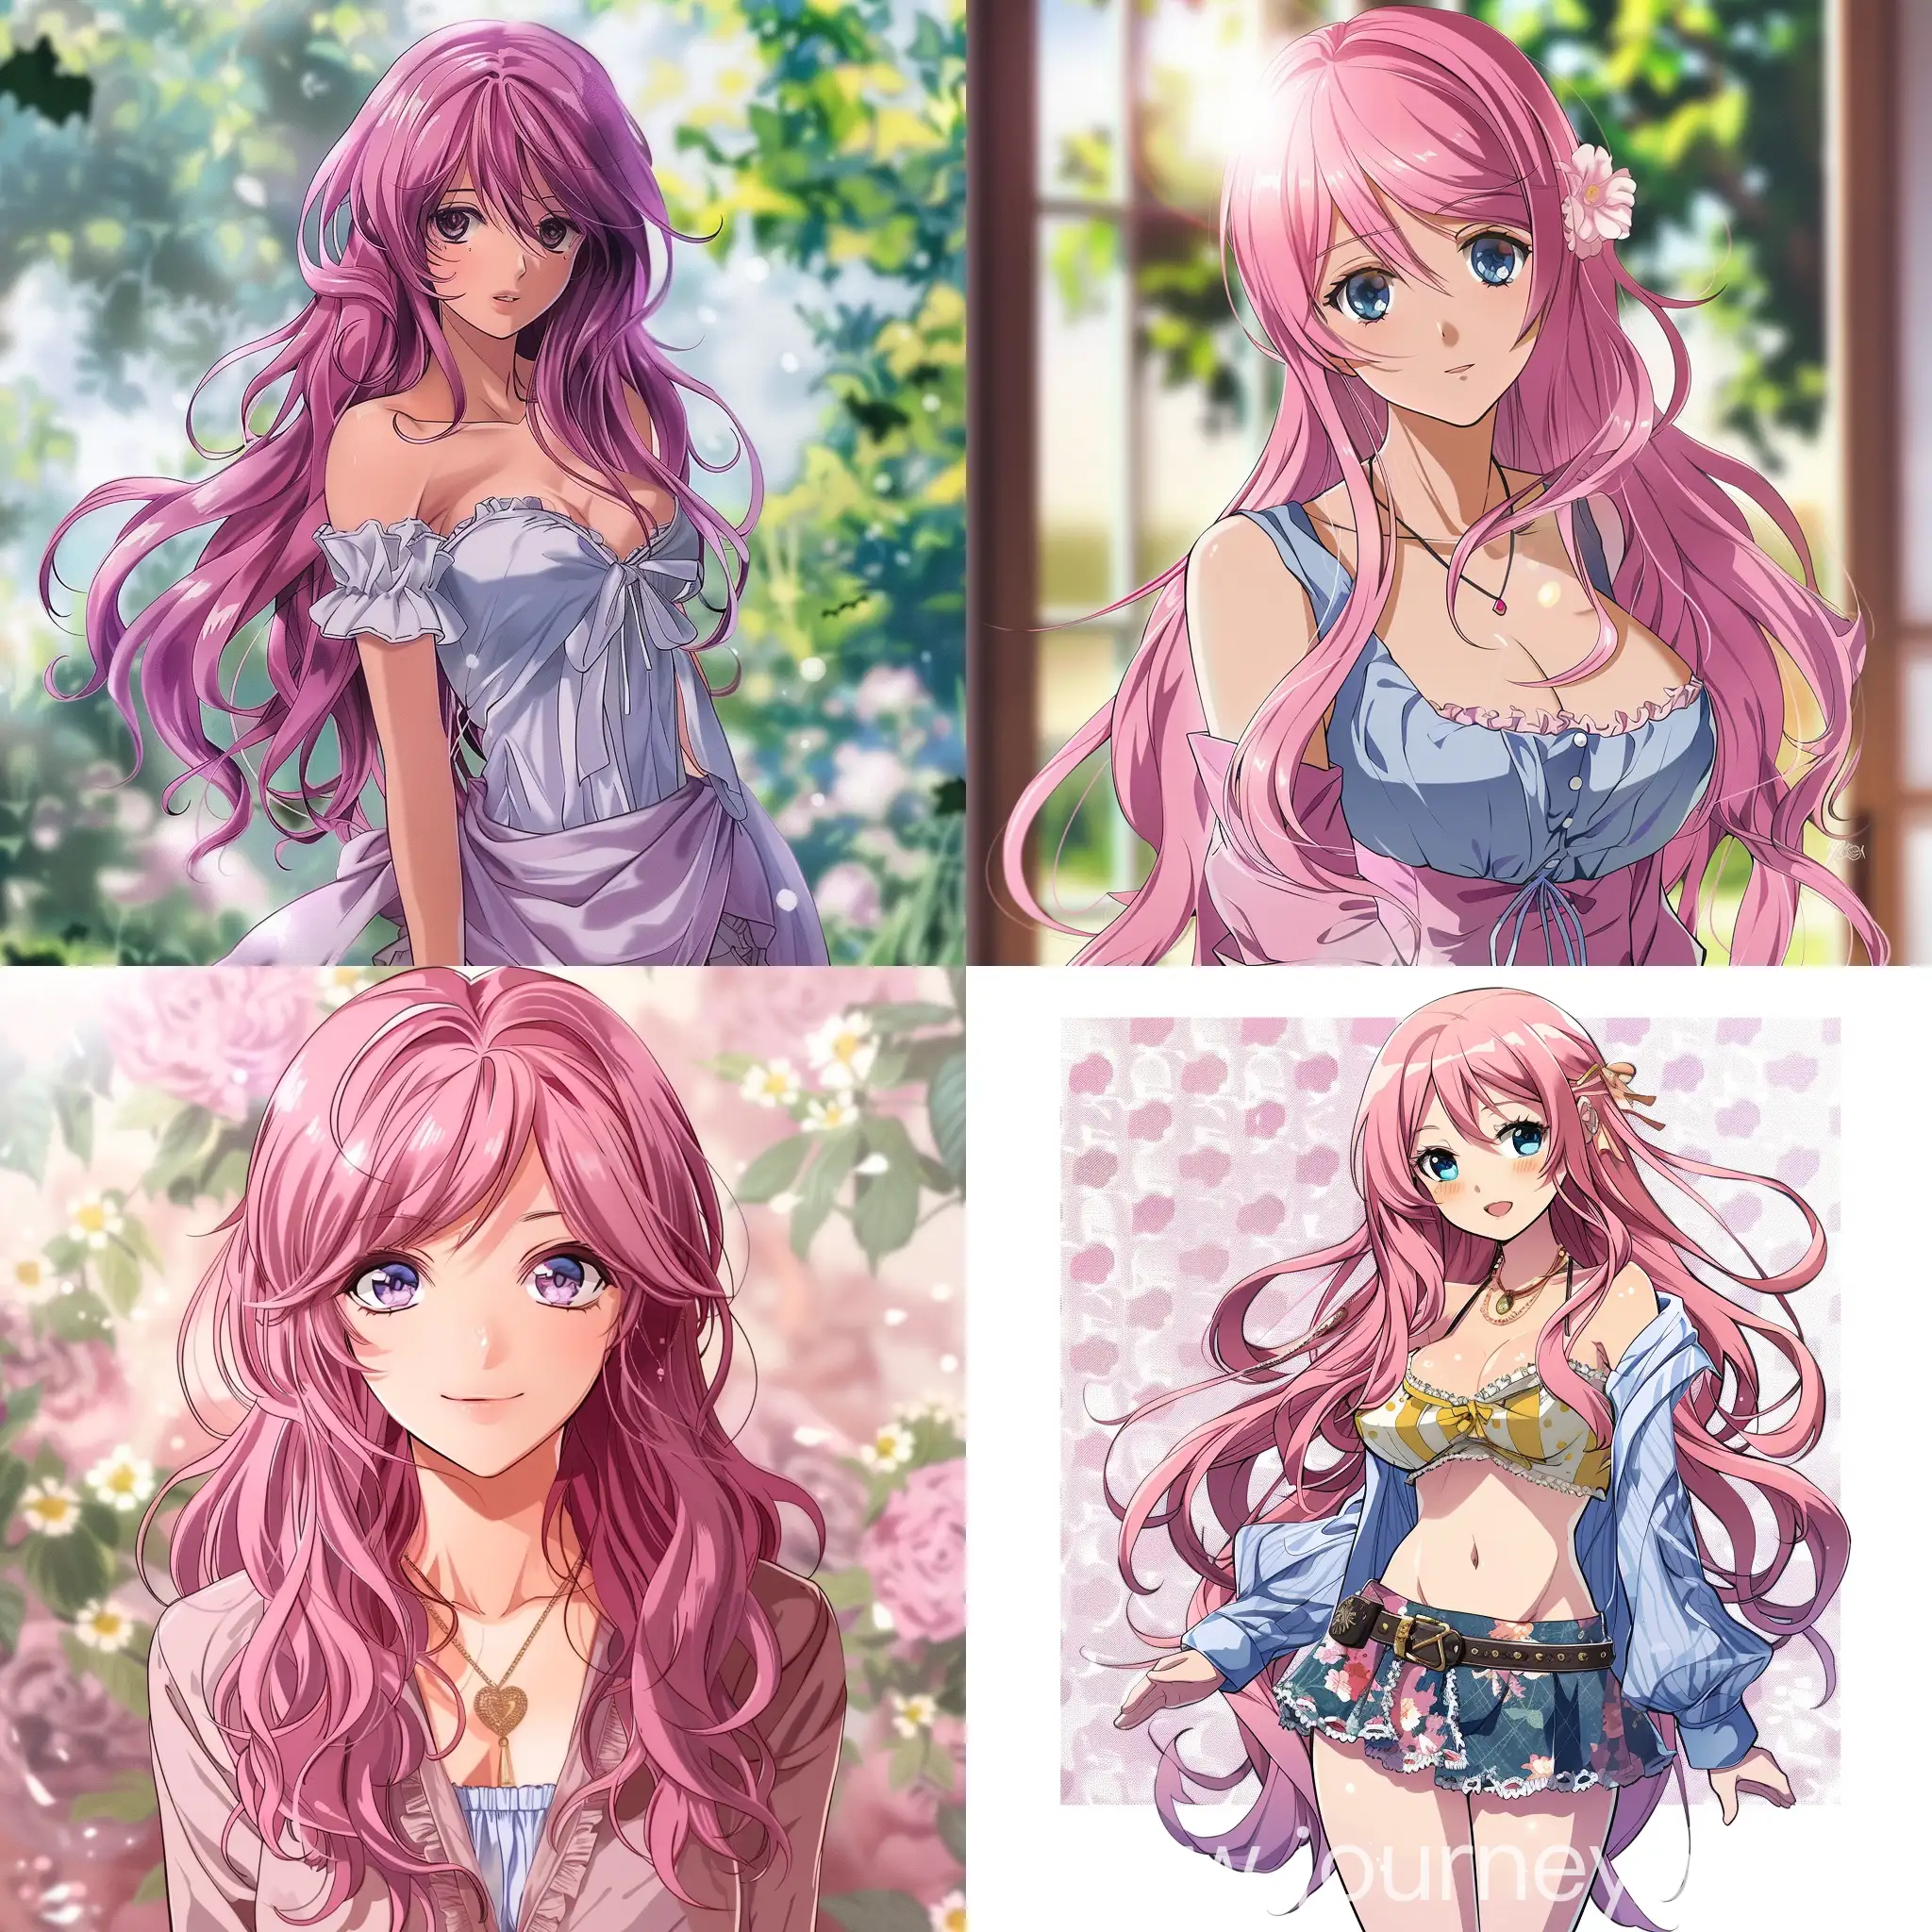 A pretty, young woman, long pink hair, wearing feminine clothes, with background, anime style